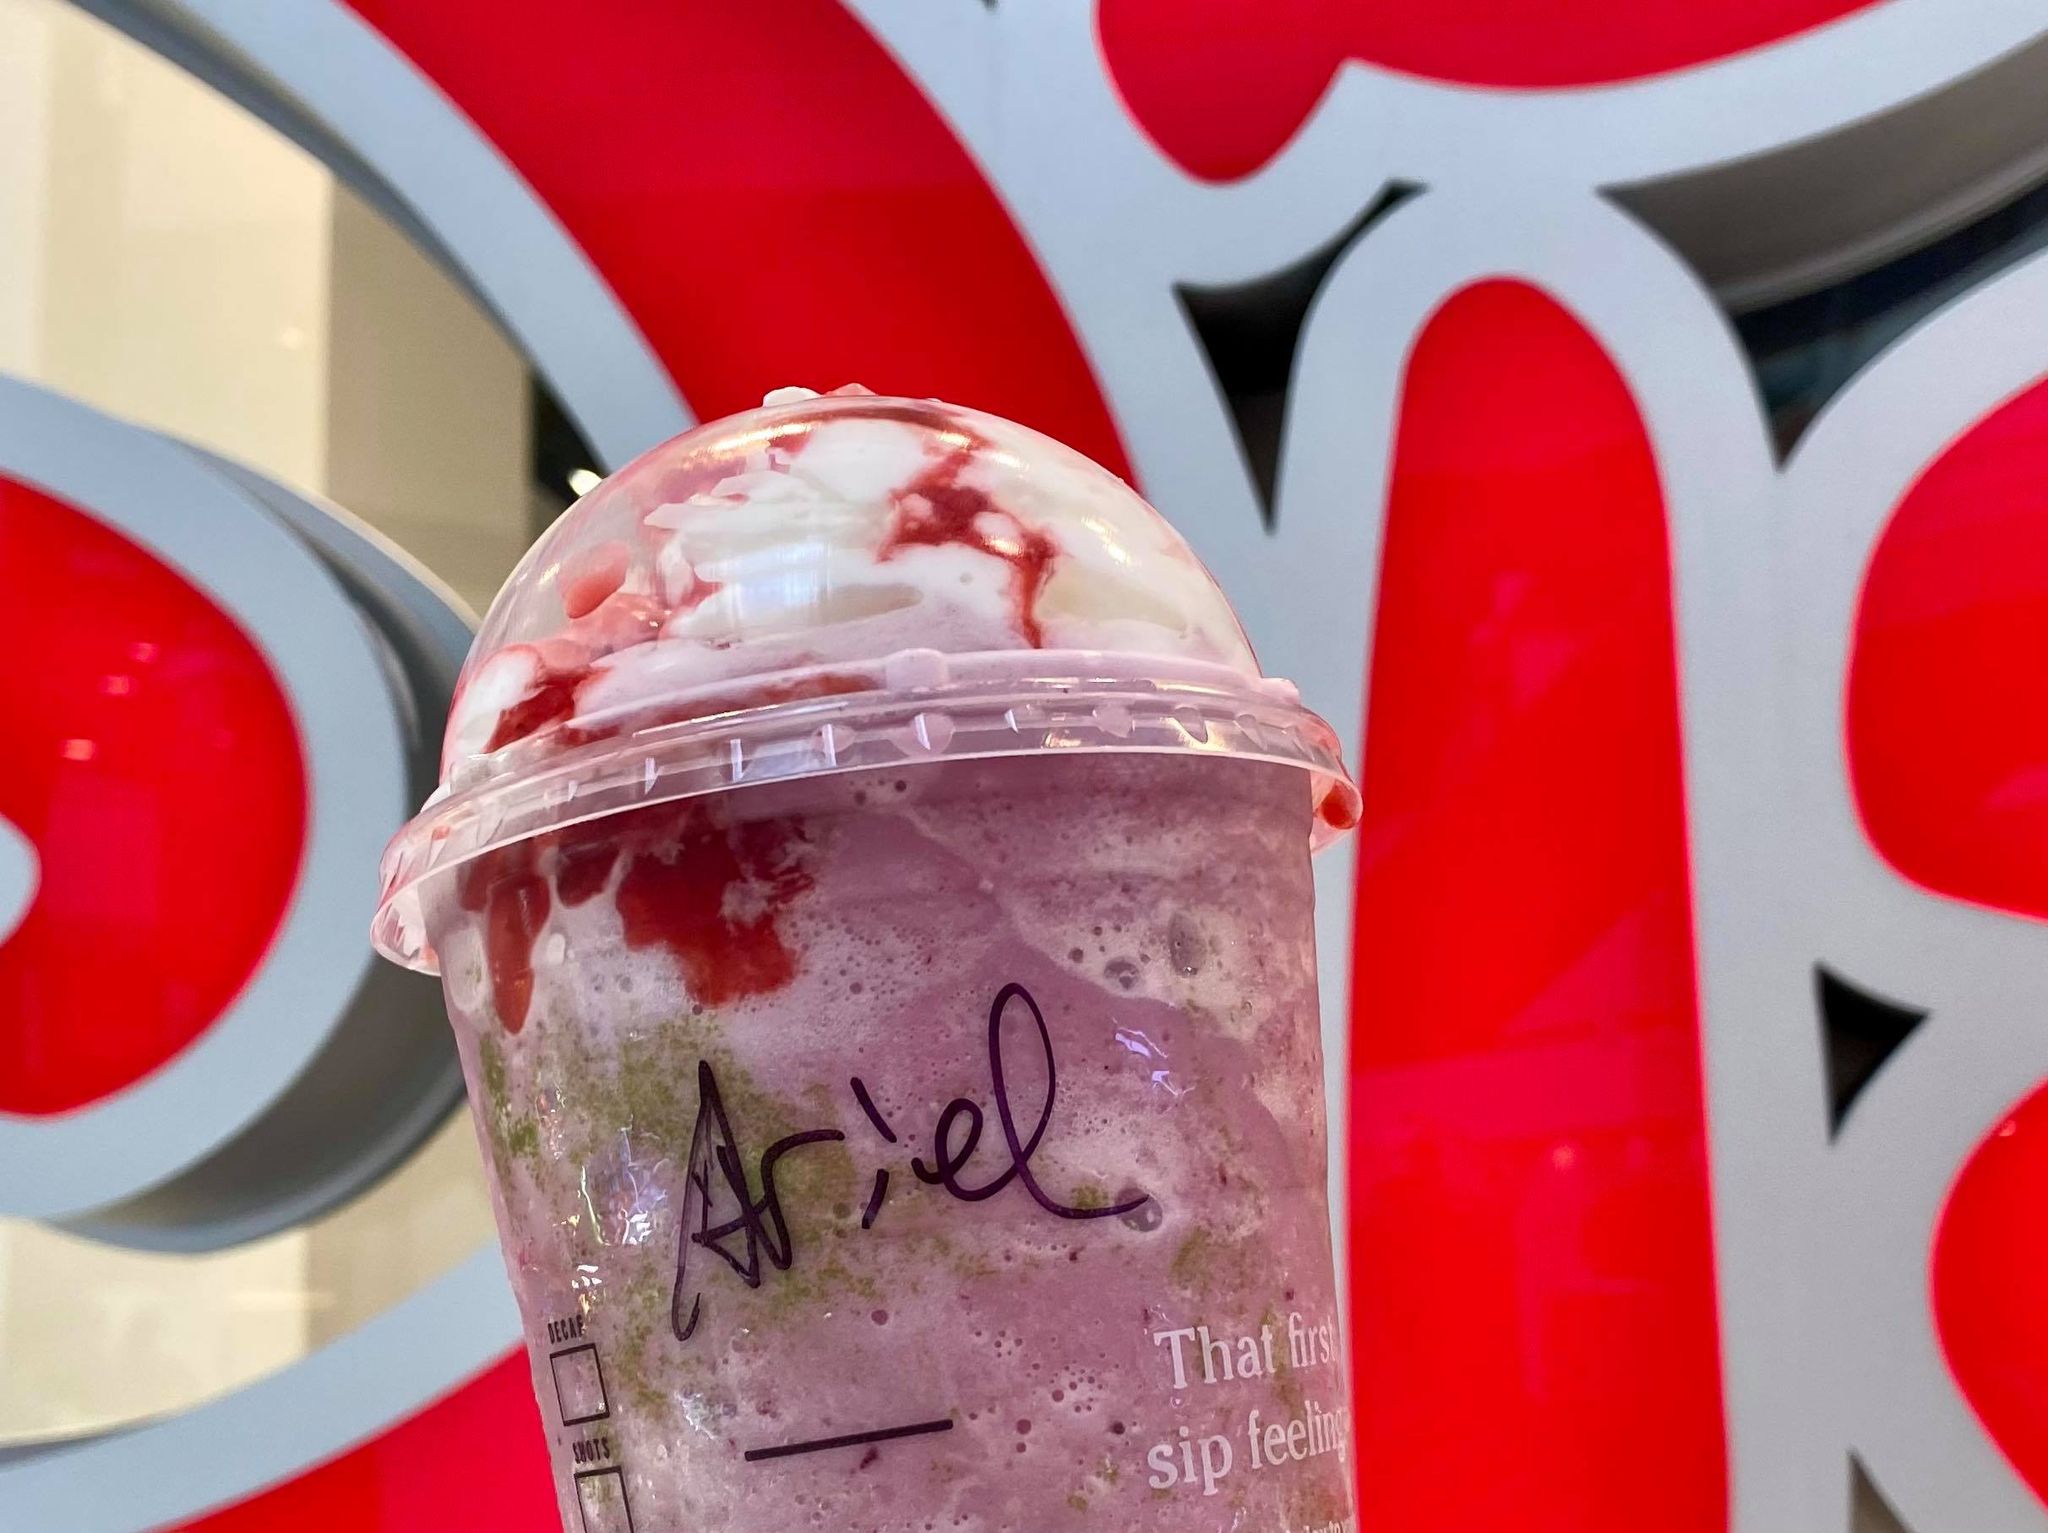 We're Flipping Our Fins For This Ariel Inspired Frappuccino From Starbucks